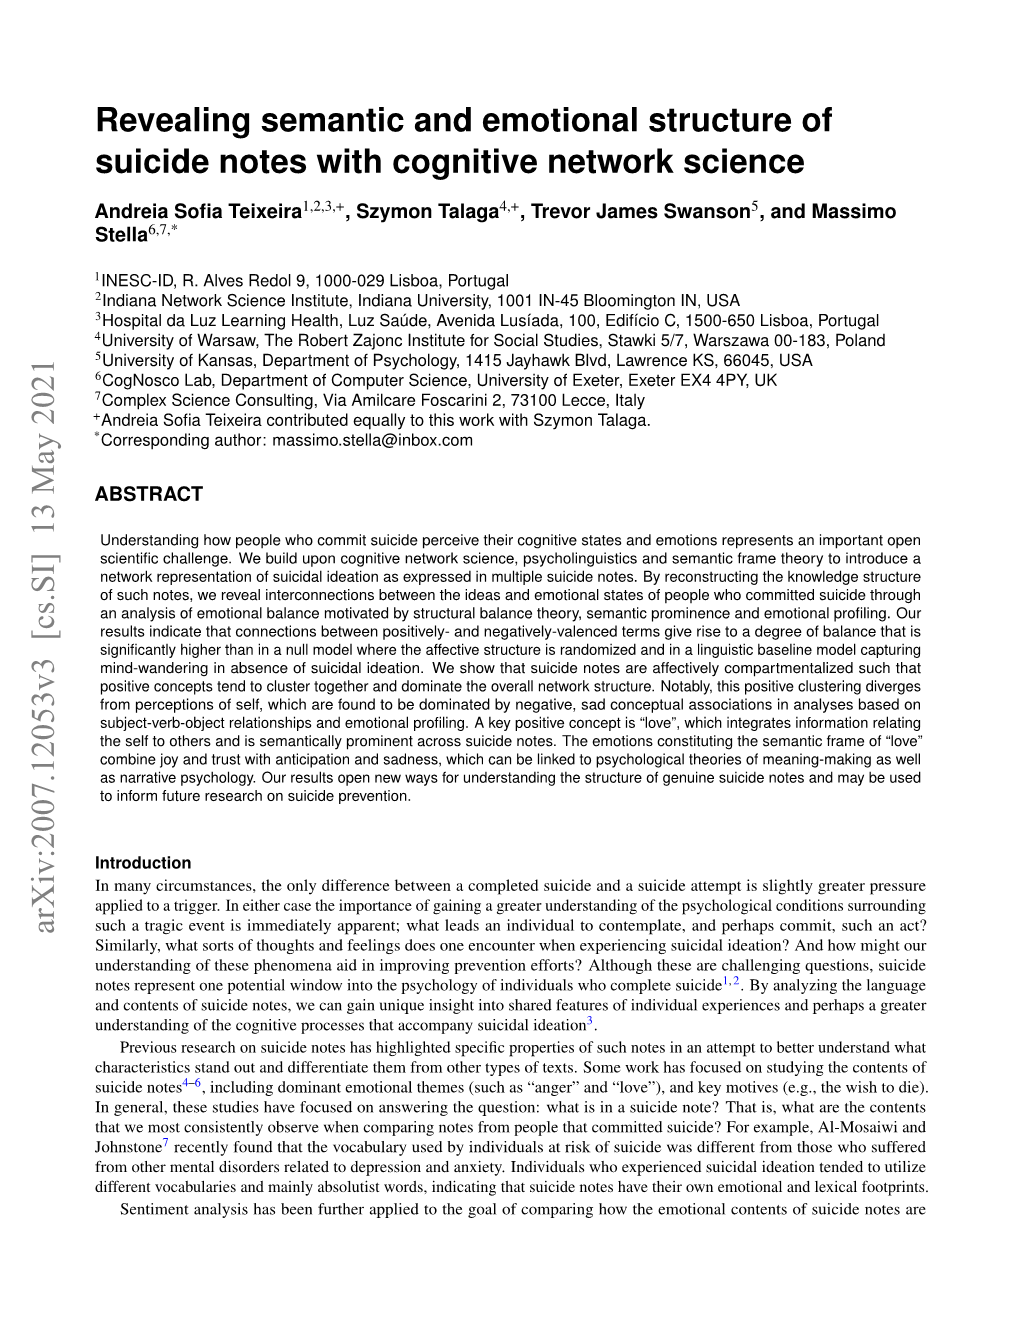 Revealing Semantic and Emotional Structure of Suicide Notes with Cognitive Network Science